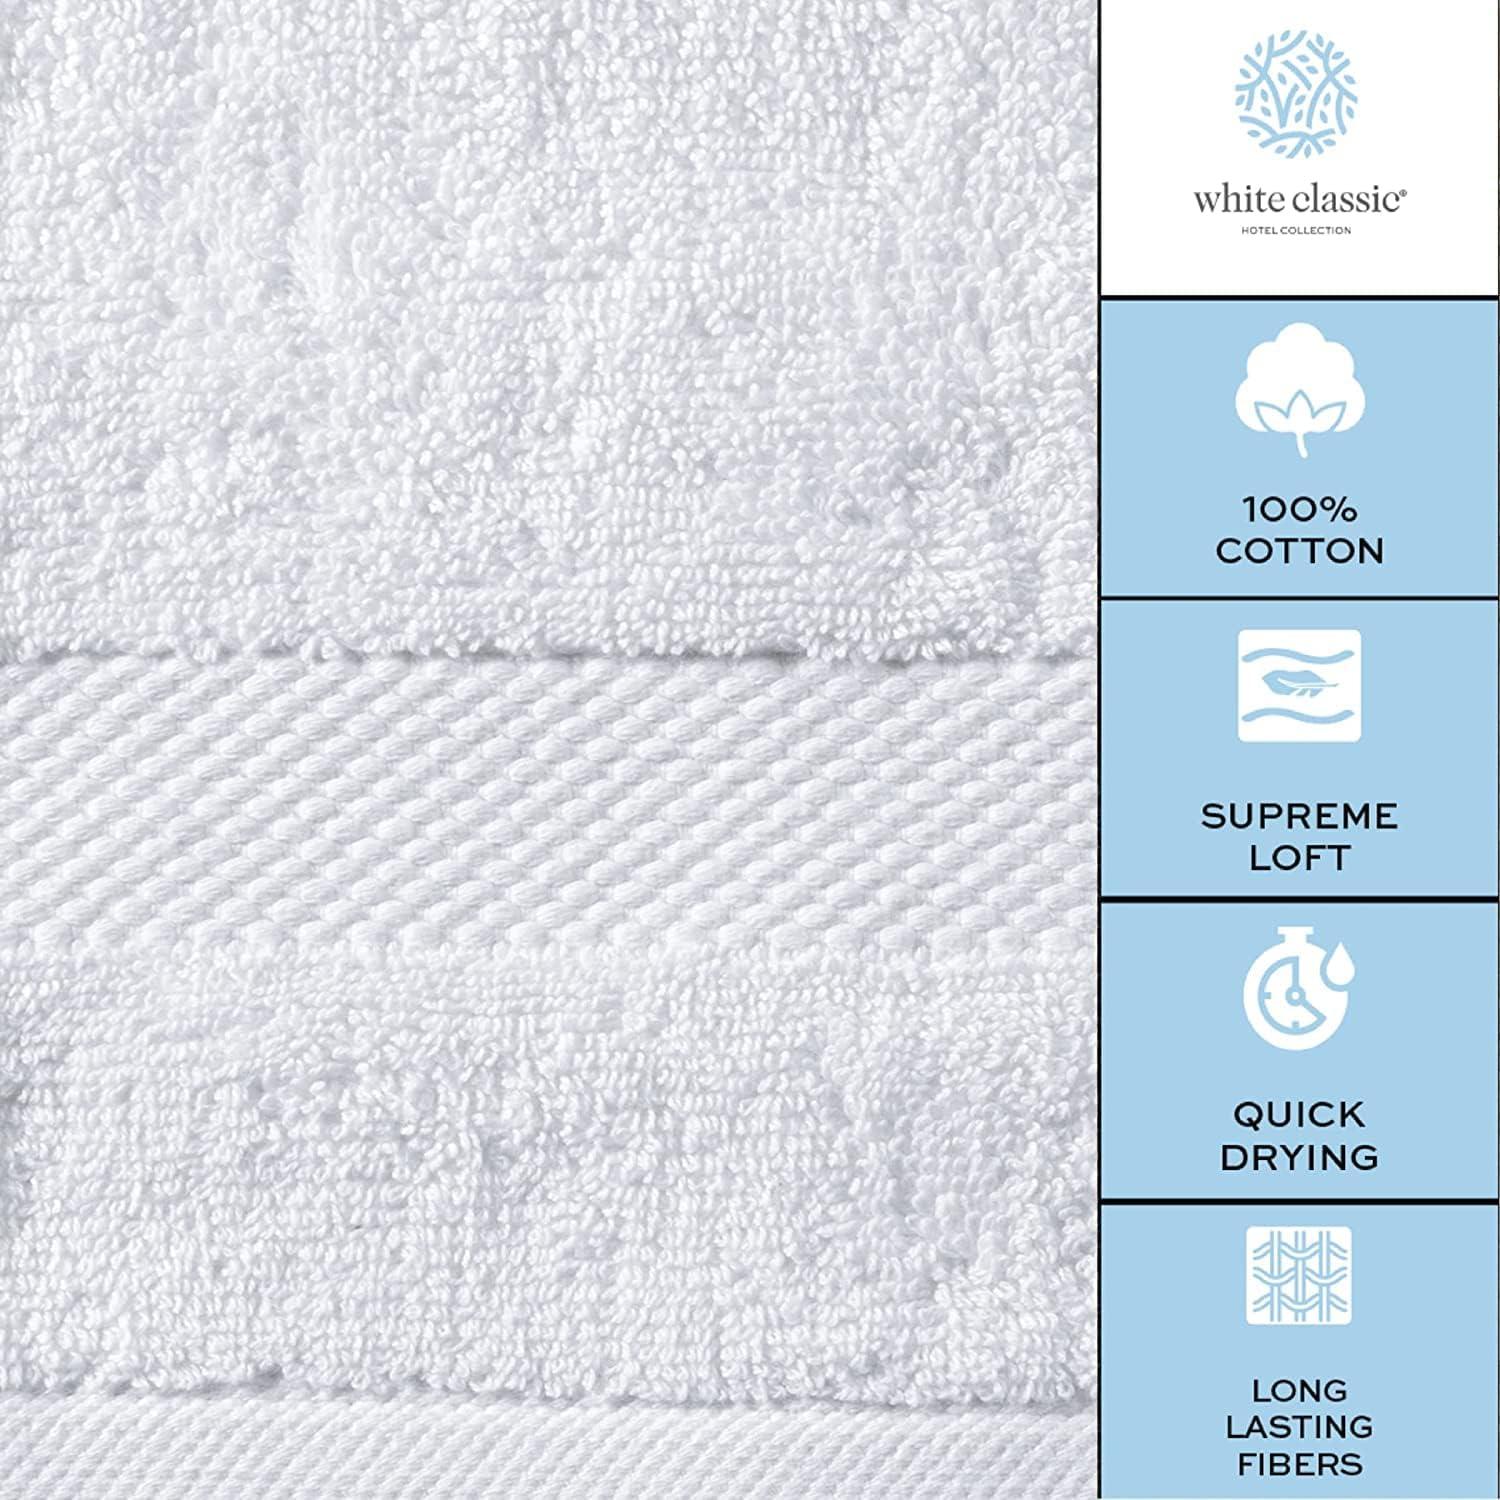 Cotton Large Luxury White Hotel Bath Towel Multiple Sizes Thickness White  Adults Bathroom Towel Fast Drying